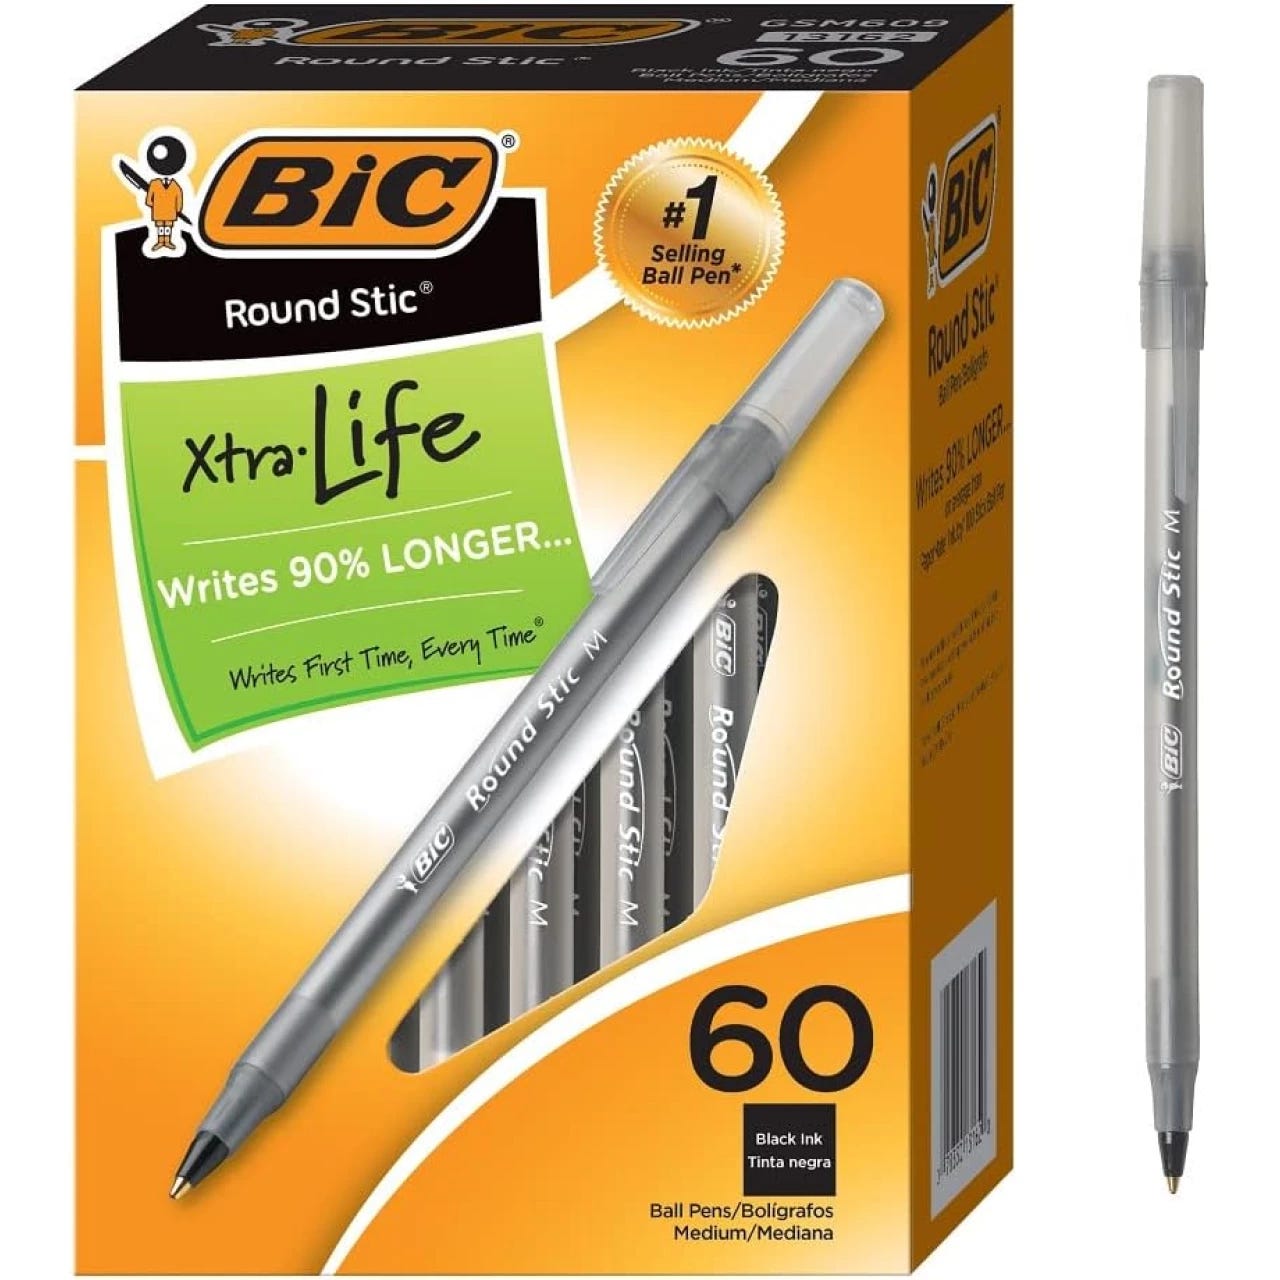 iBayam Fineliner Pens REVIEW!, Journal & Planner Pens, Product Review